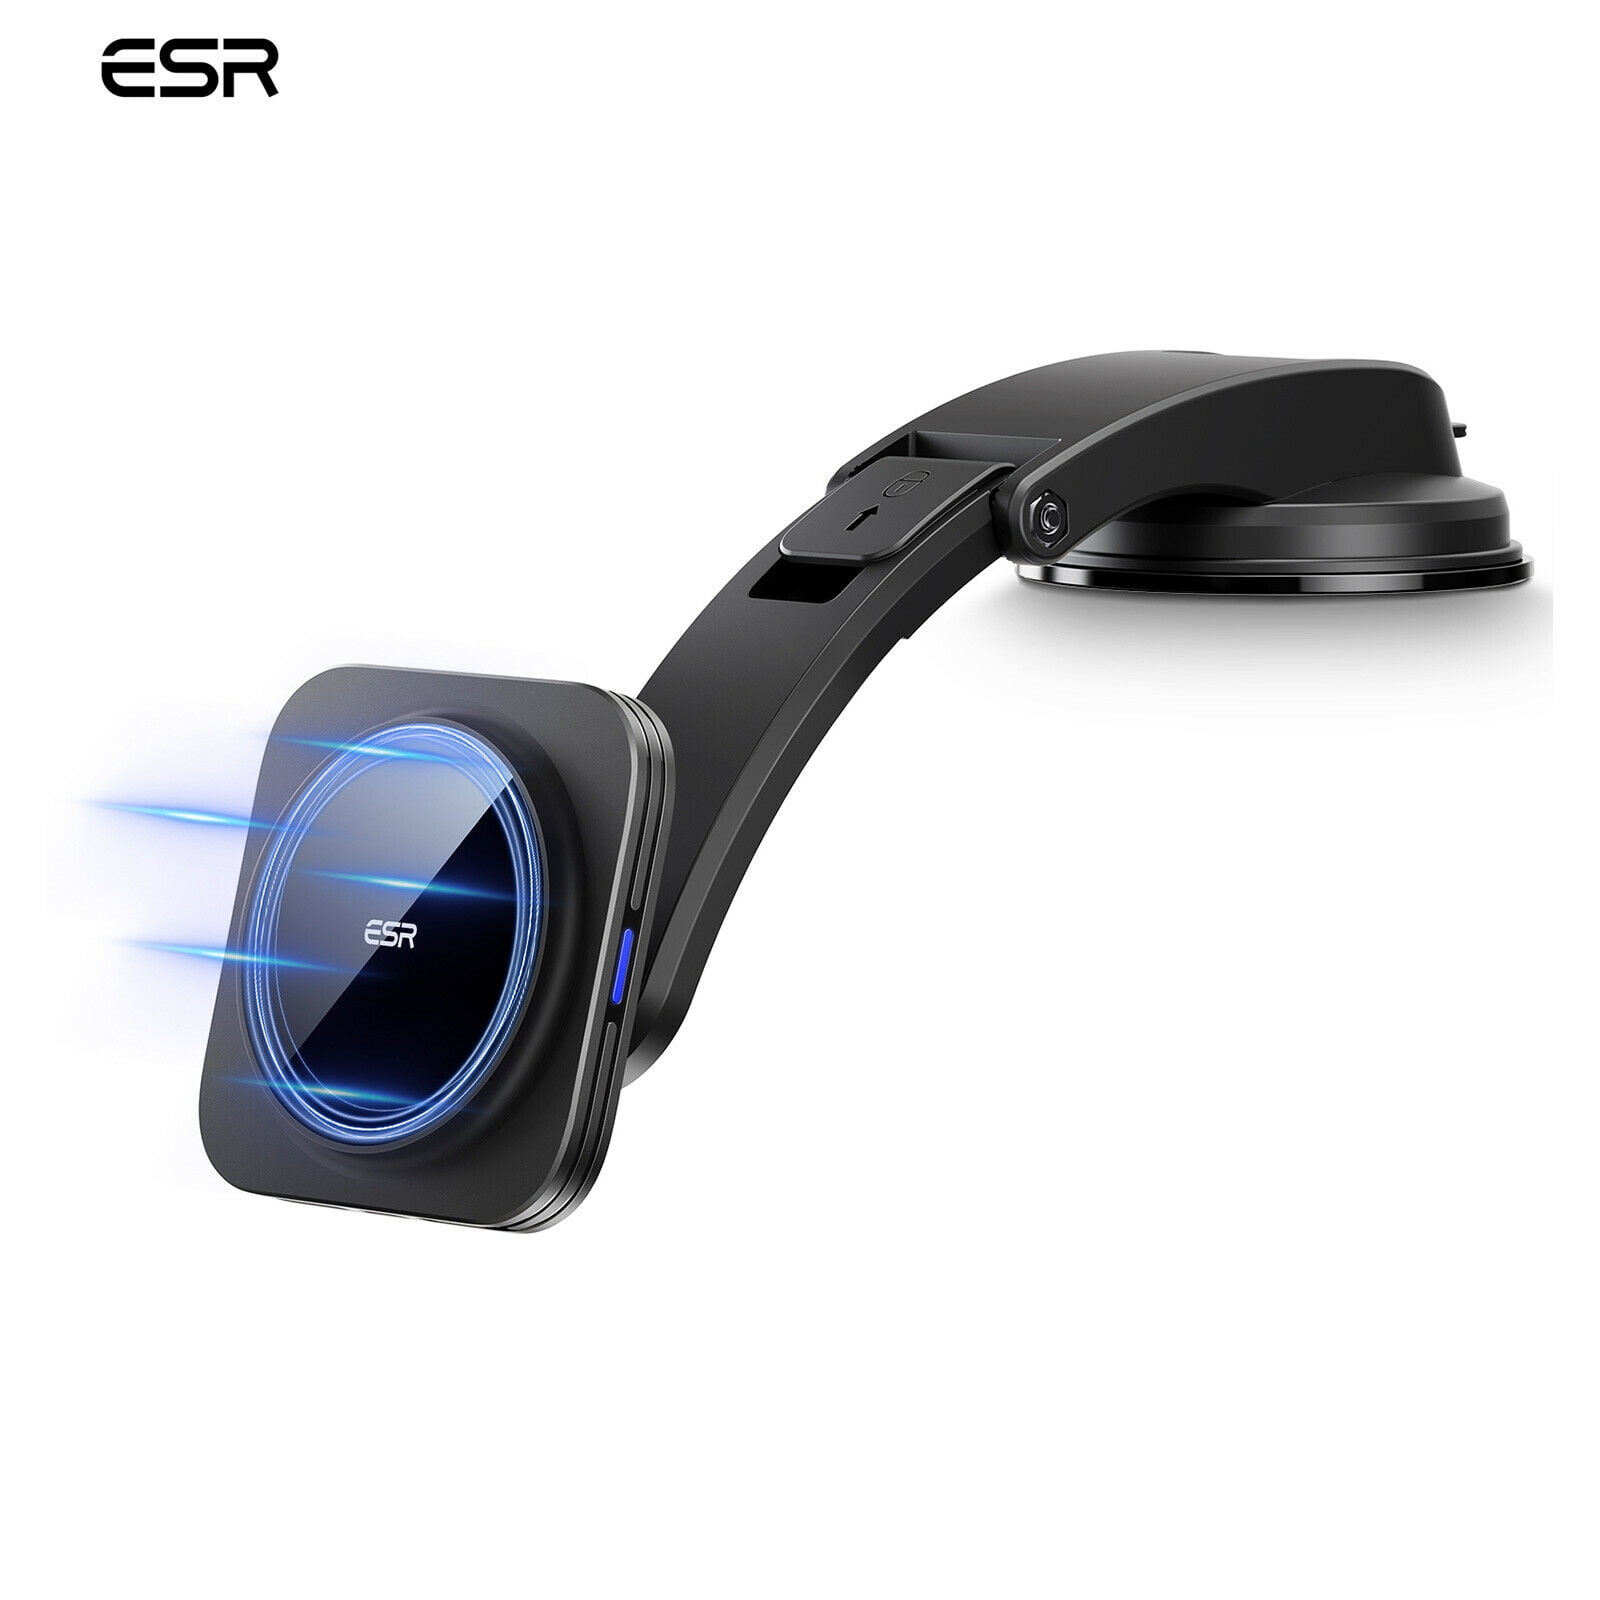 ESR HaloLock Magnetic Wireless MagSafe Car Charger, Fast Charging